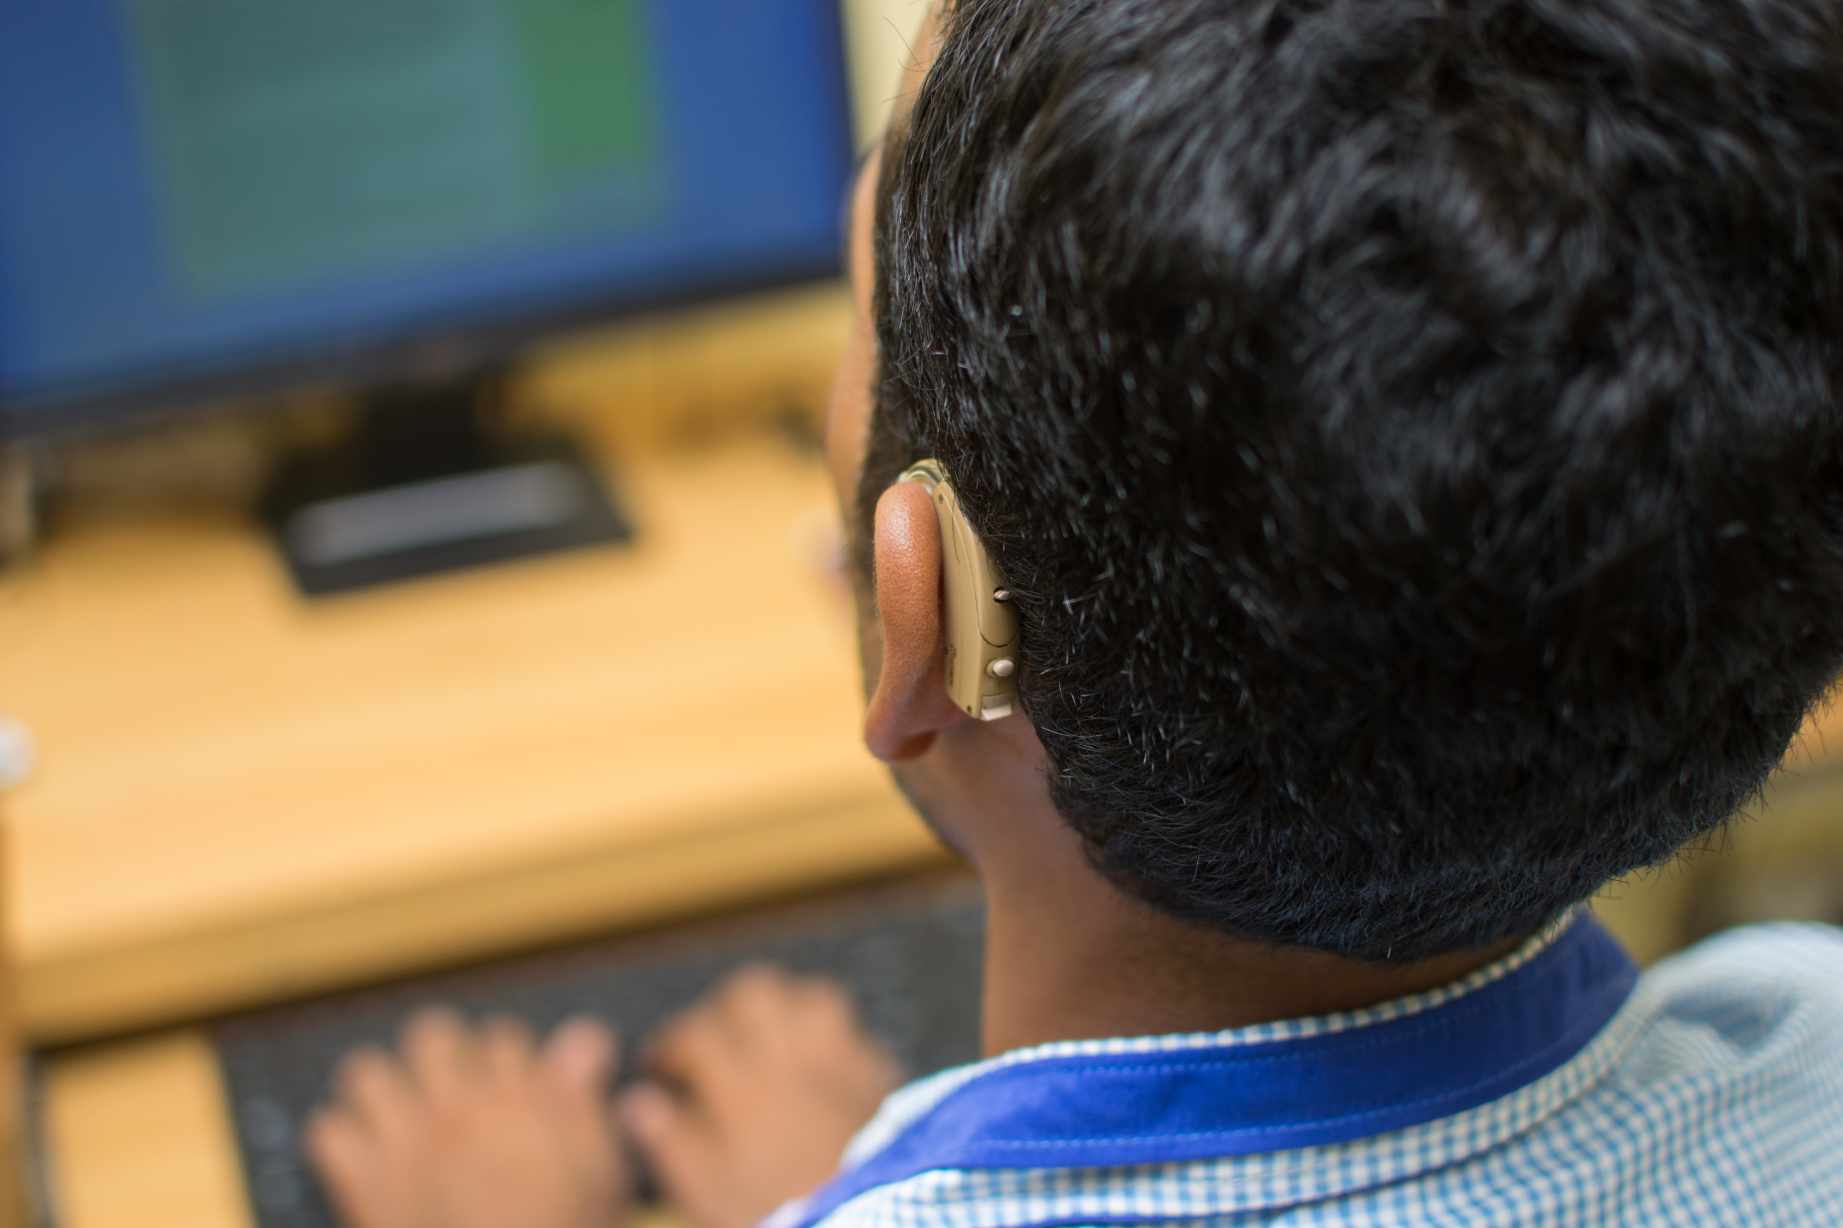 young boy using a computer wearing a hearing aid-disability